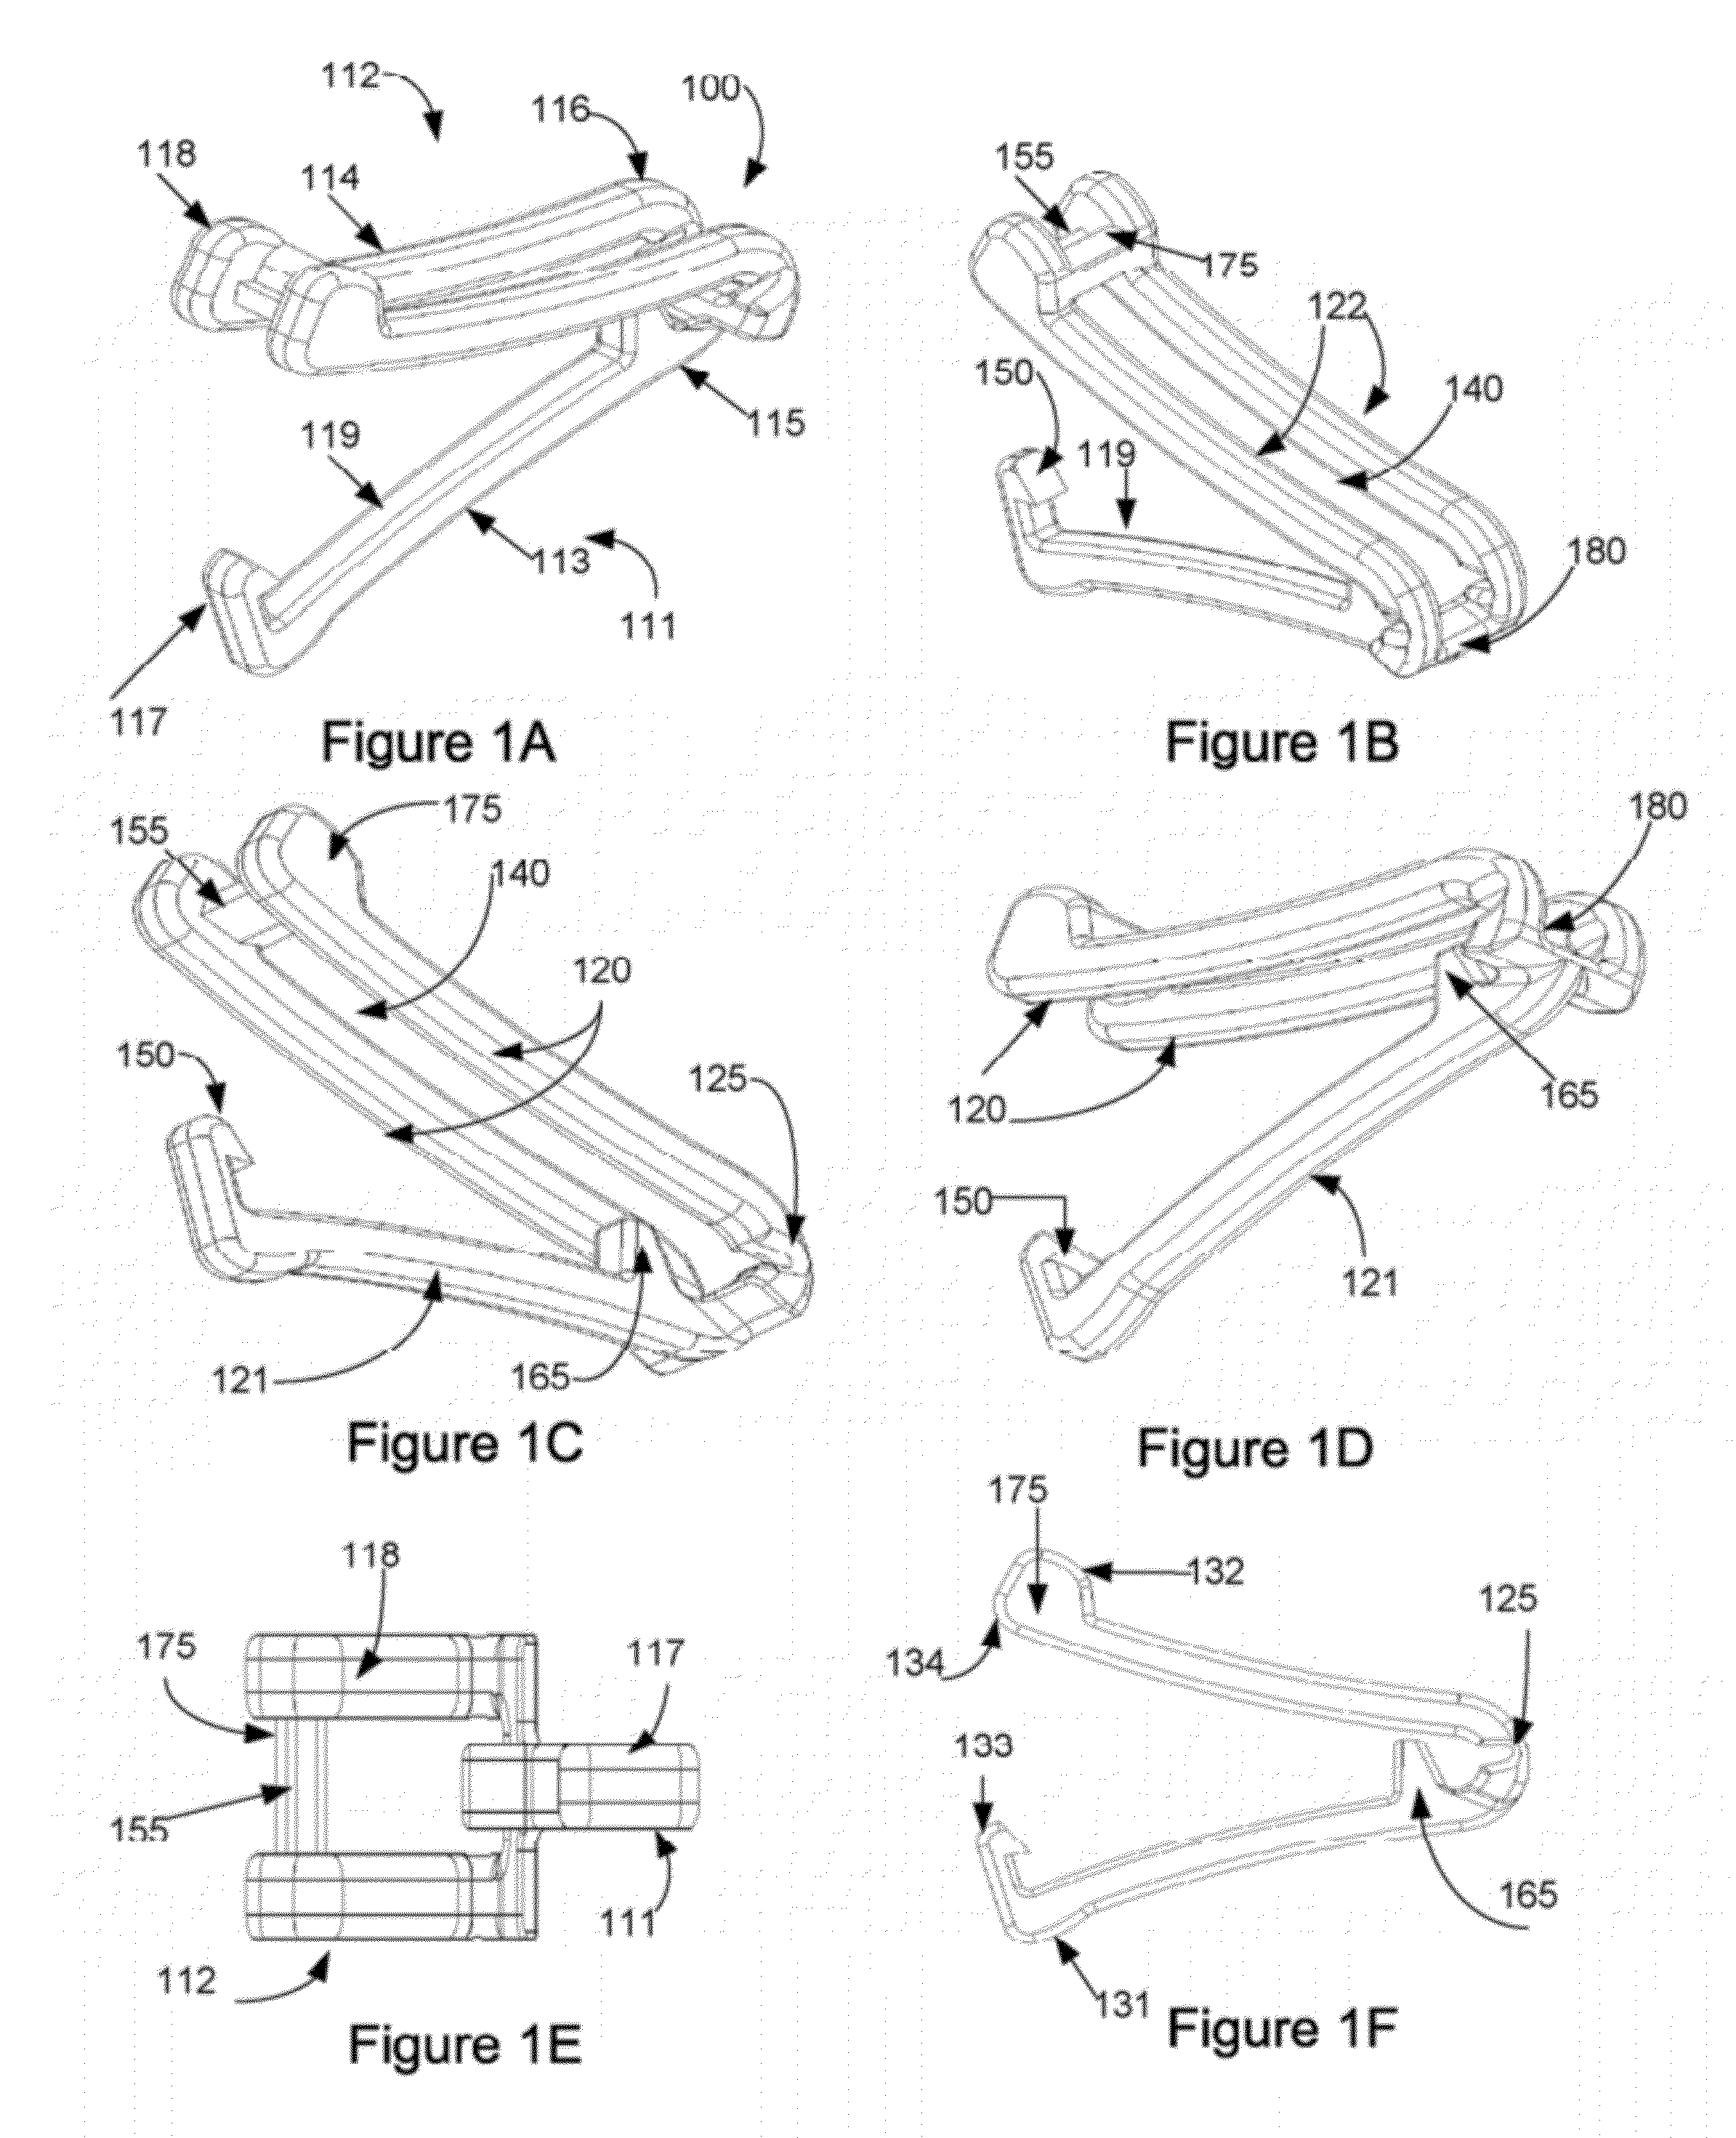 Surgical Ligation Clip and Applicator Device